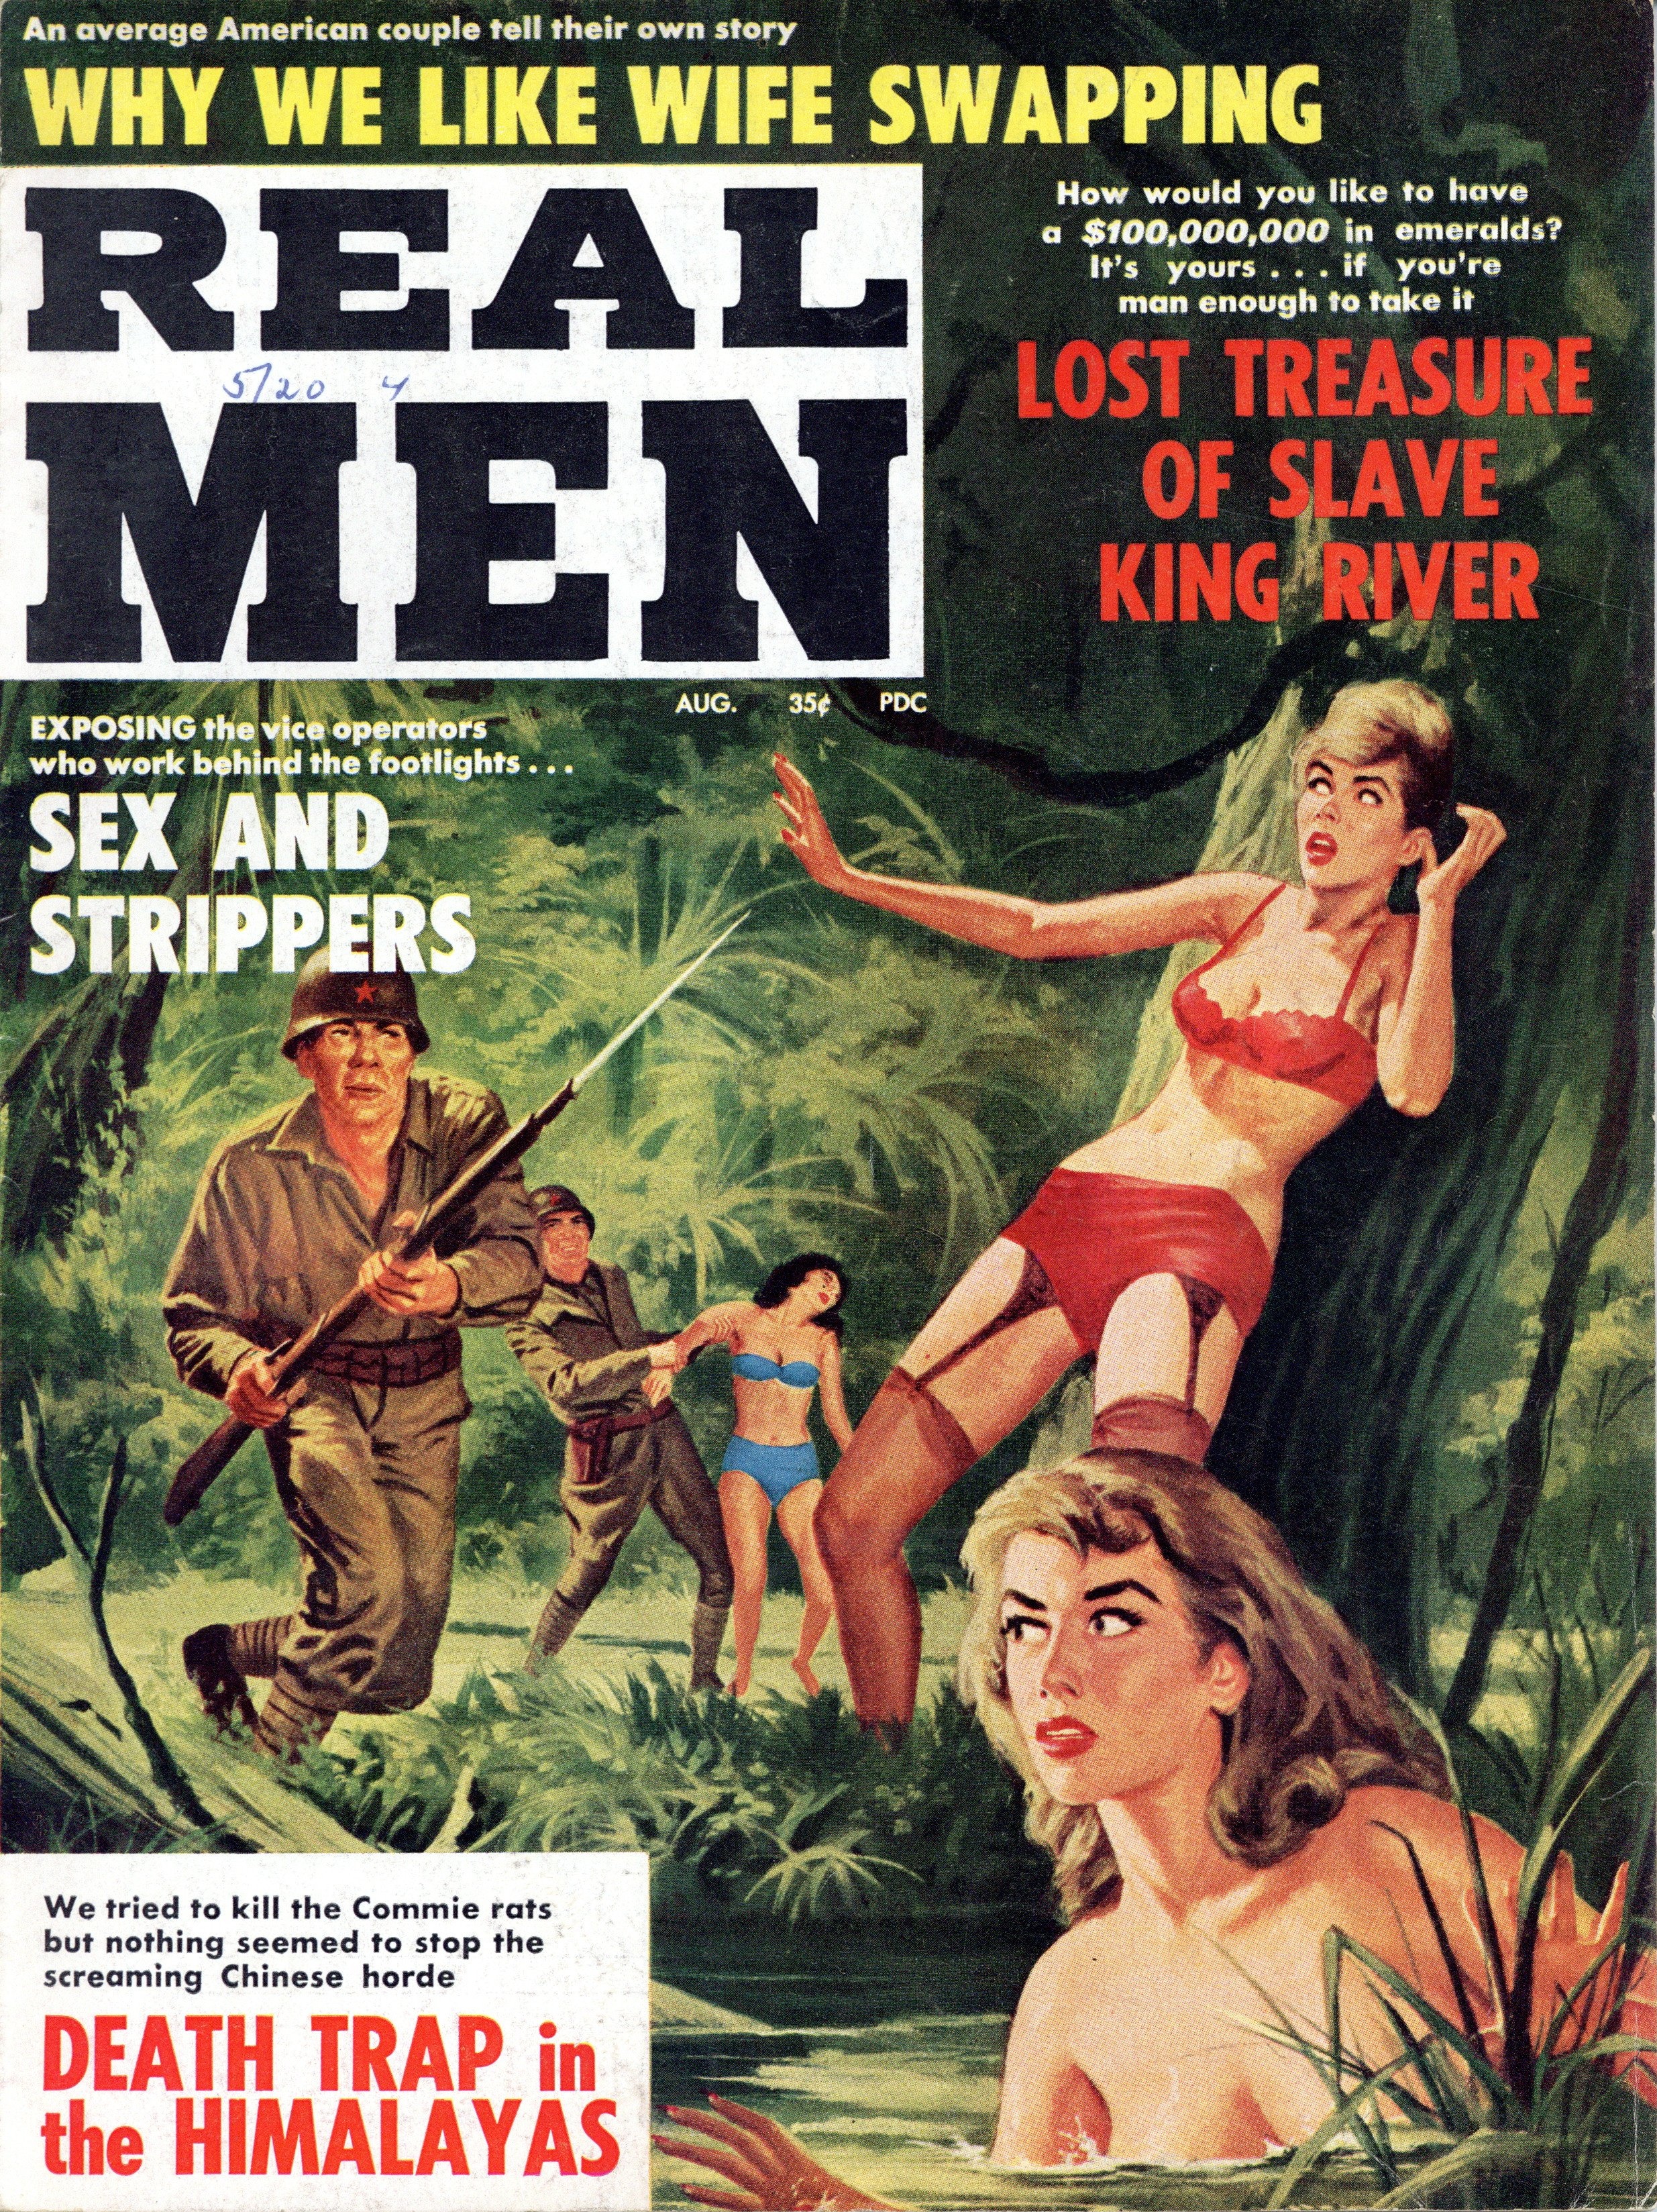 Lost Treasure Of Slave King River -- Pulp Covers image